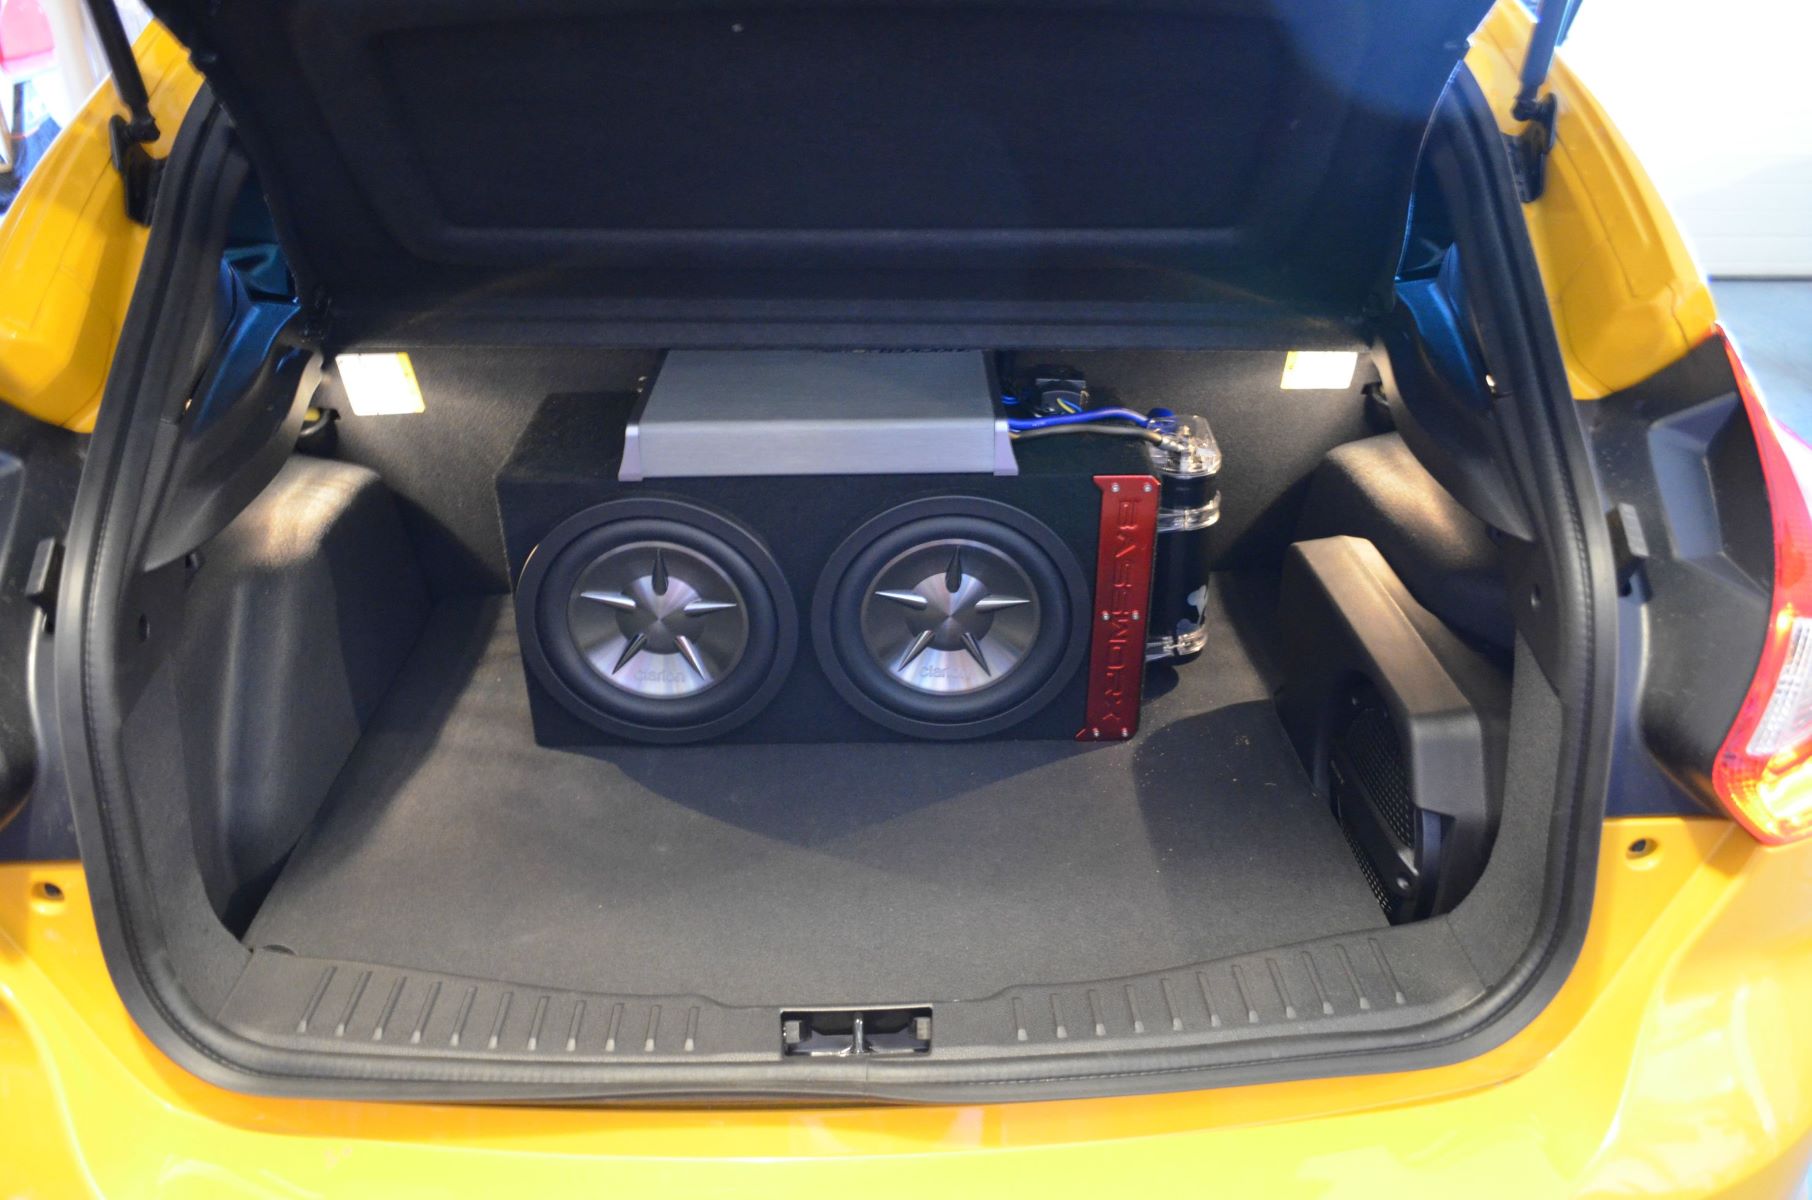 How To Put A Subwoofer In 2014 Ford Focus